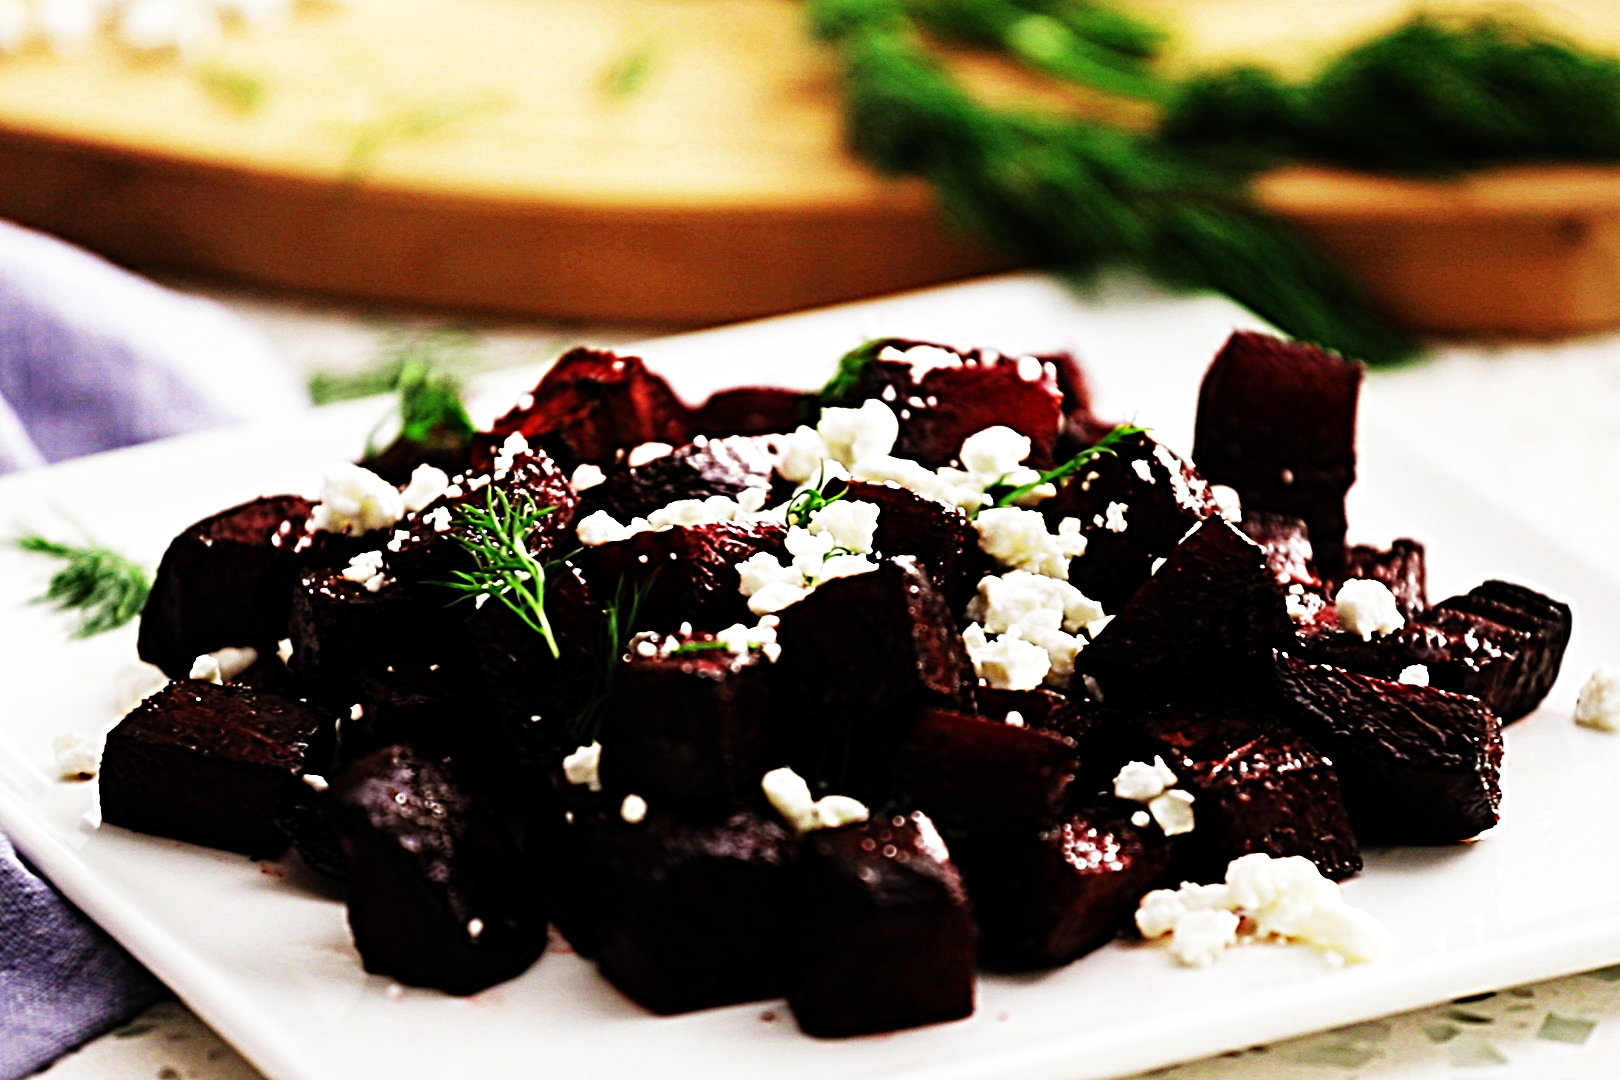 Stupid-Easy Recipe for Roasted Beets with Goat Cheese (#1 Top-Rated)